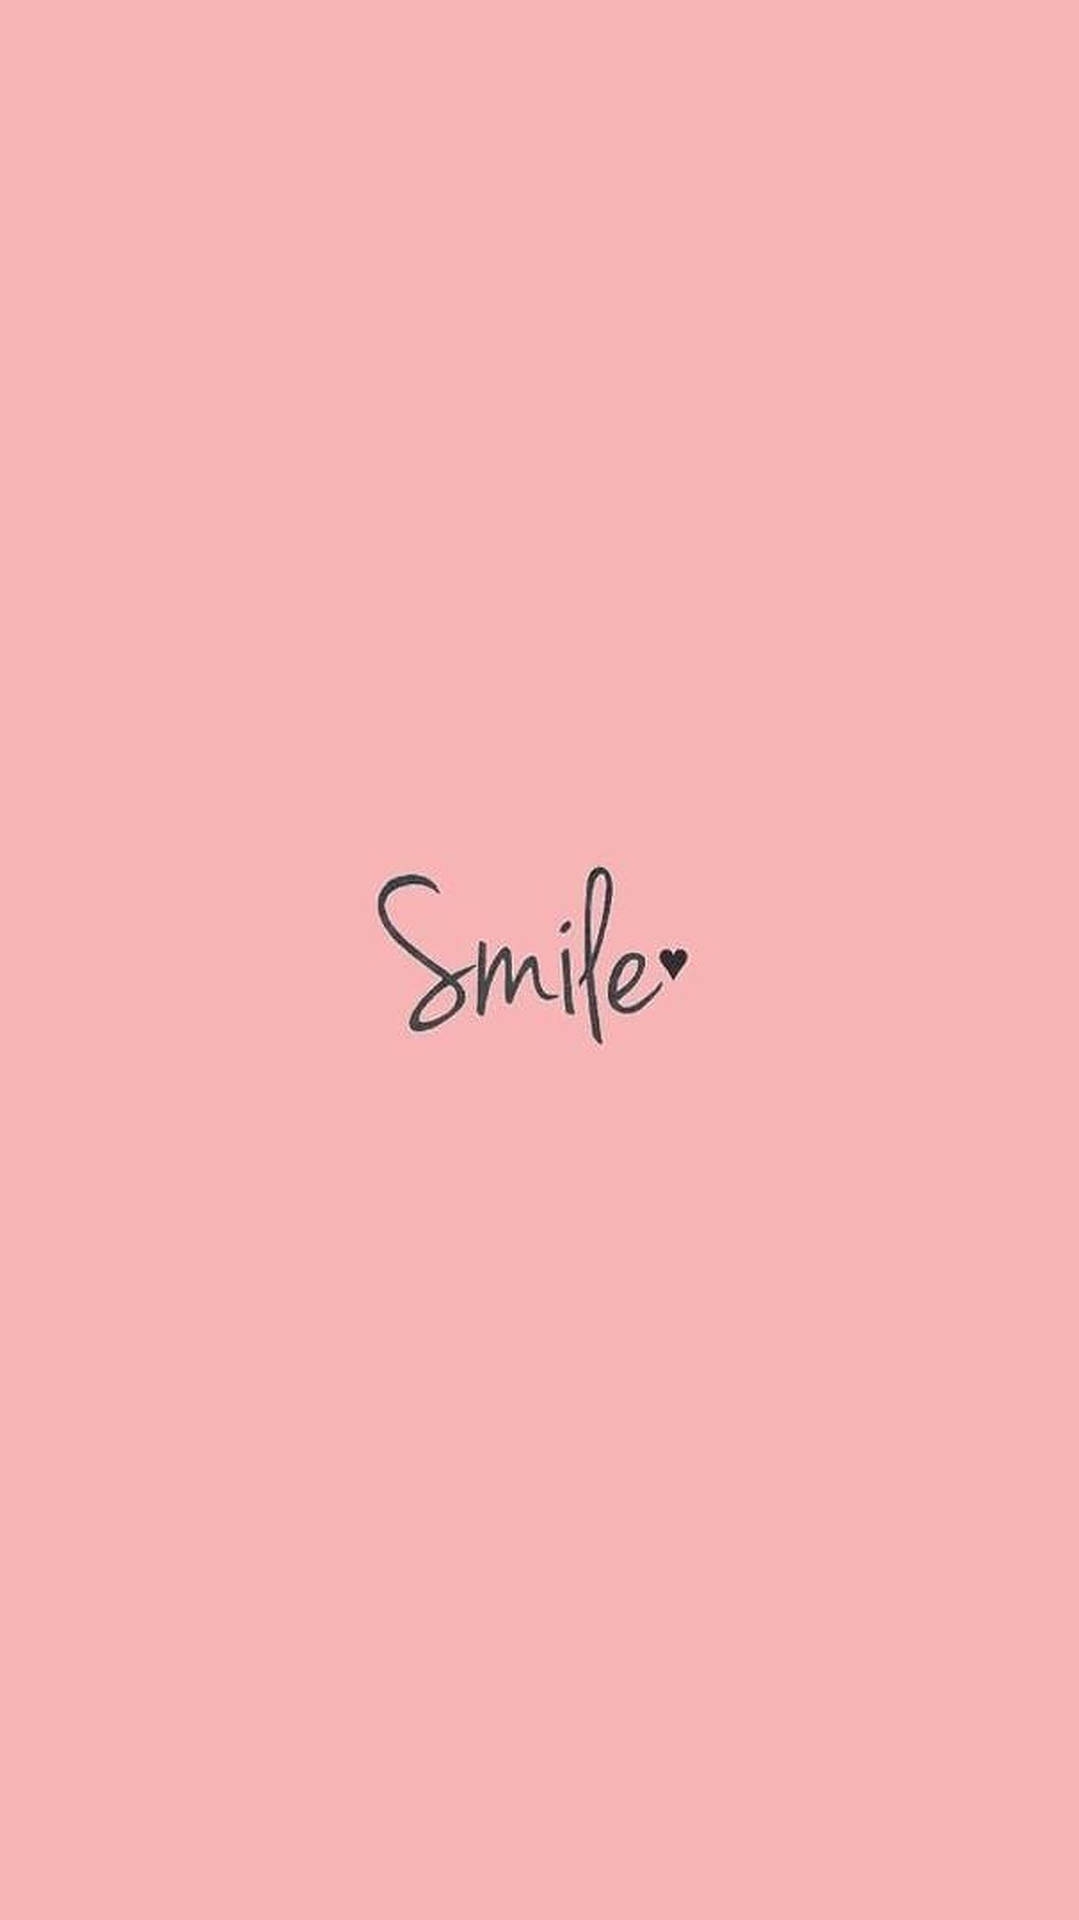 Smile Aesthetic Word Background